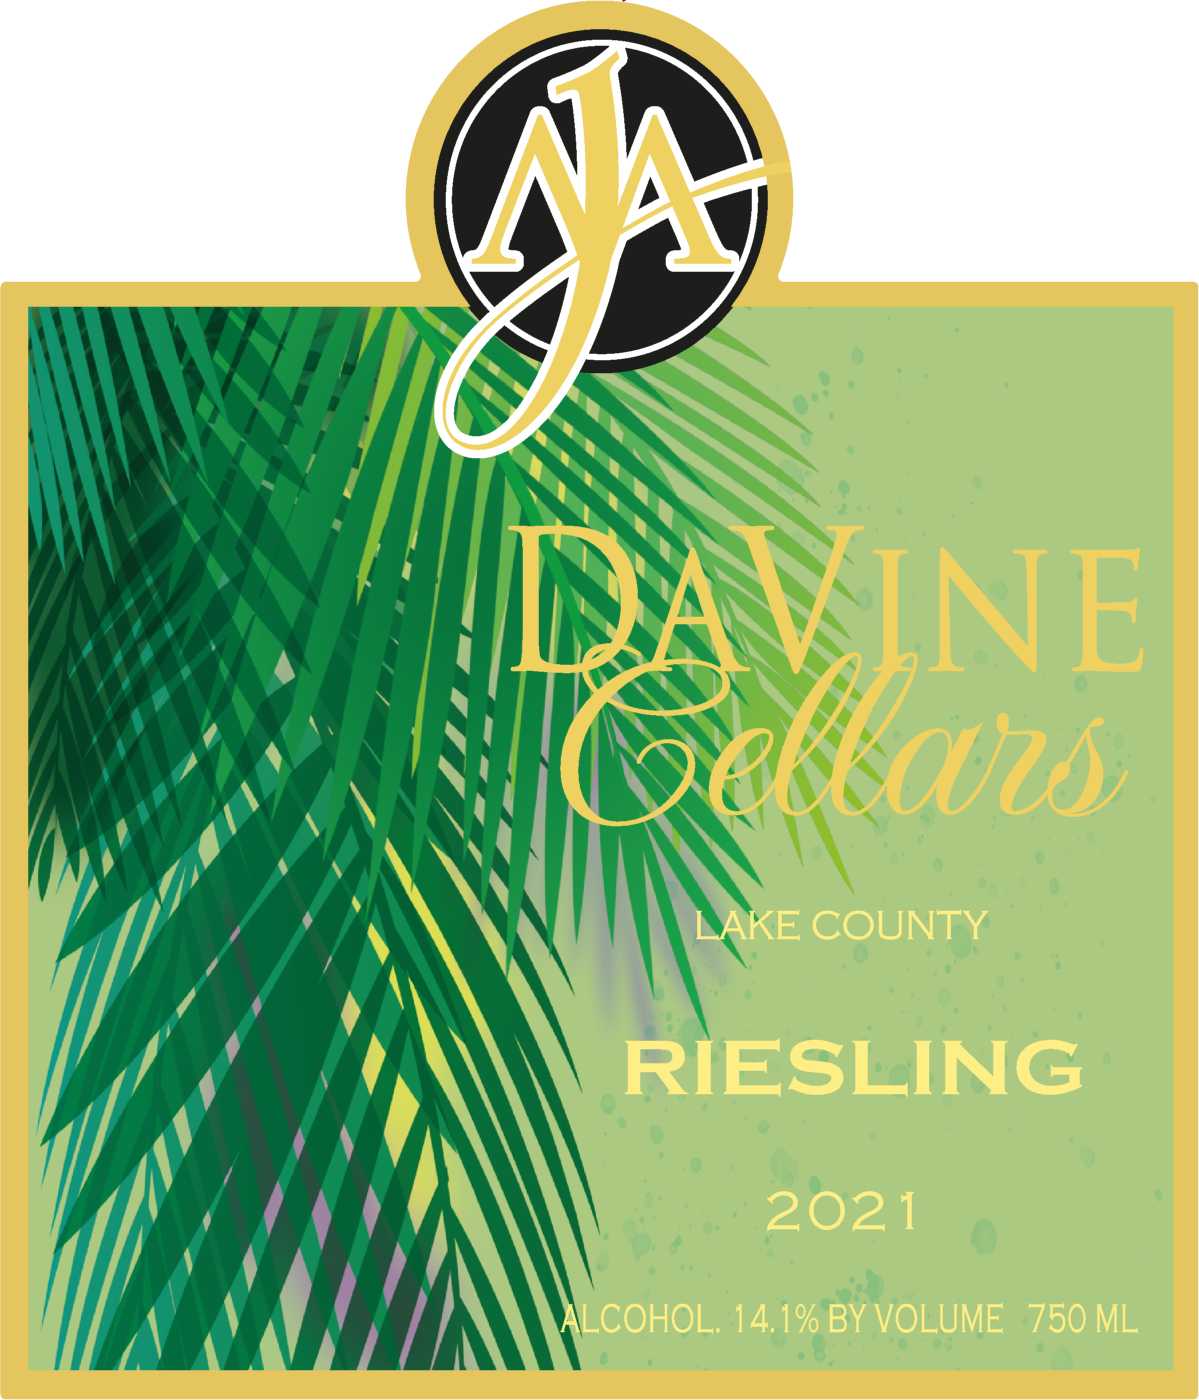 Product Image for 2021 Lake County Riesling "Nooner"